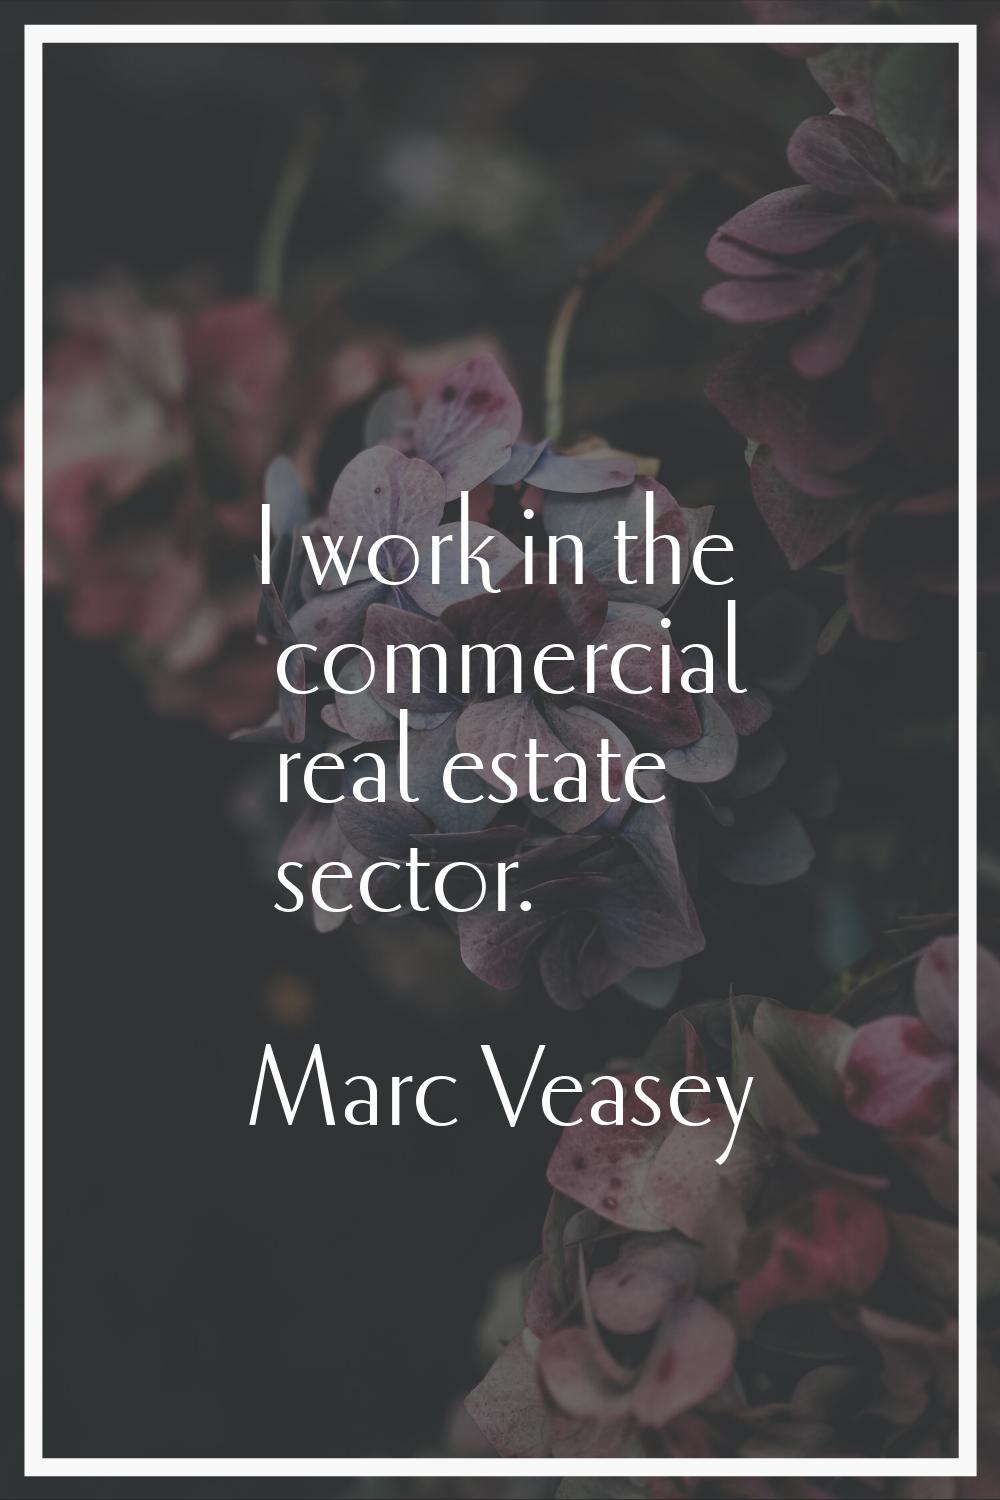 I work in the commercial real estate sector.